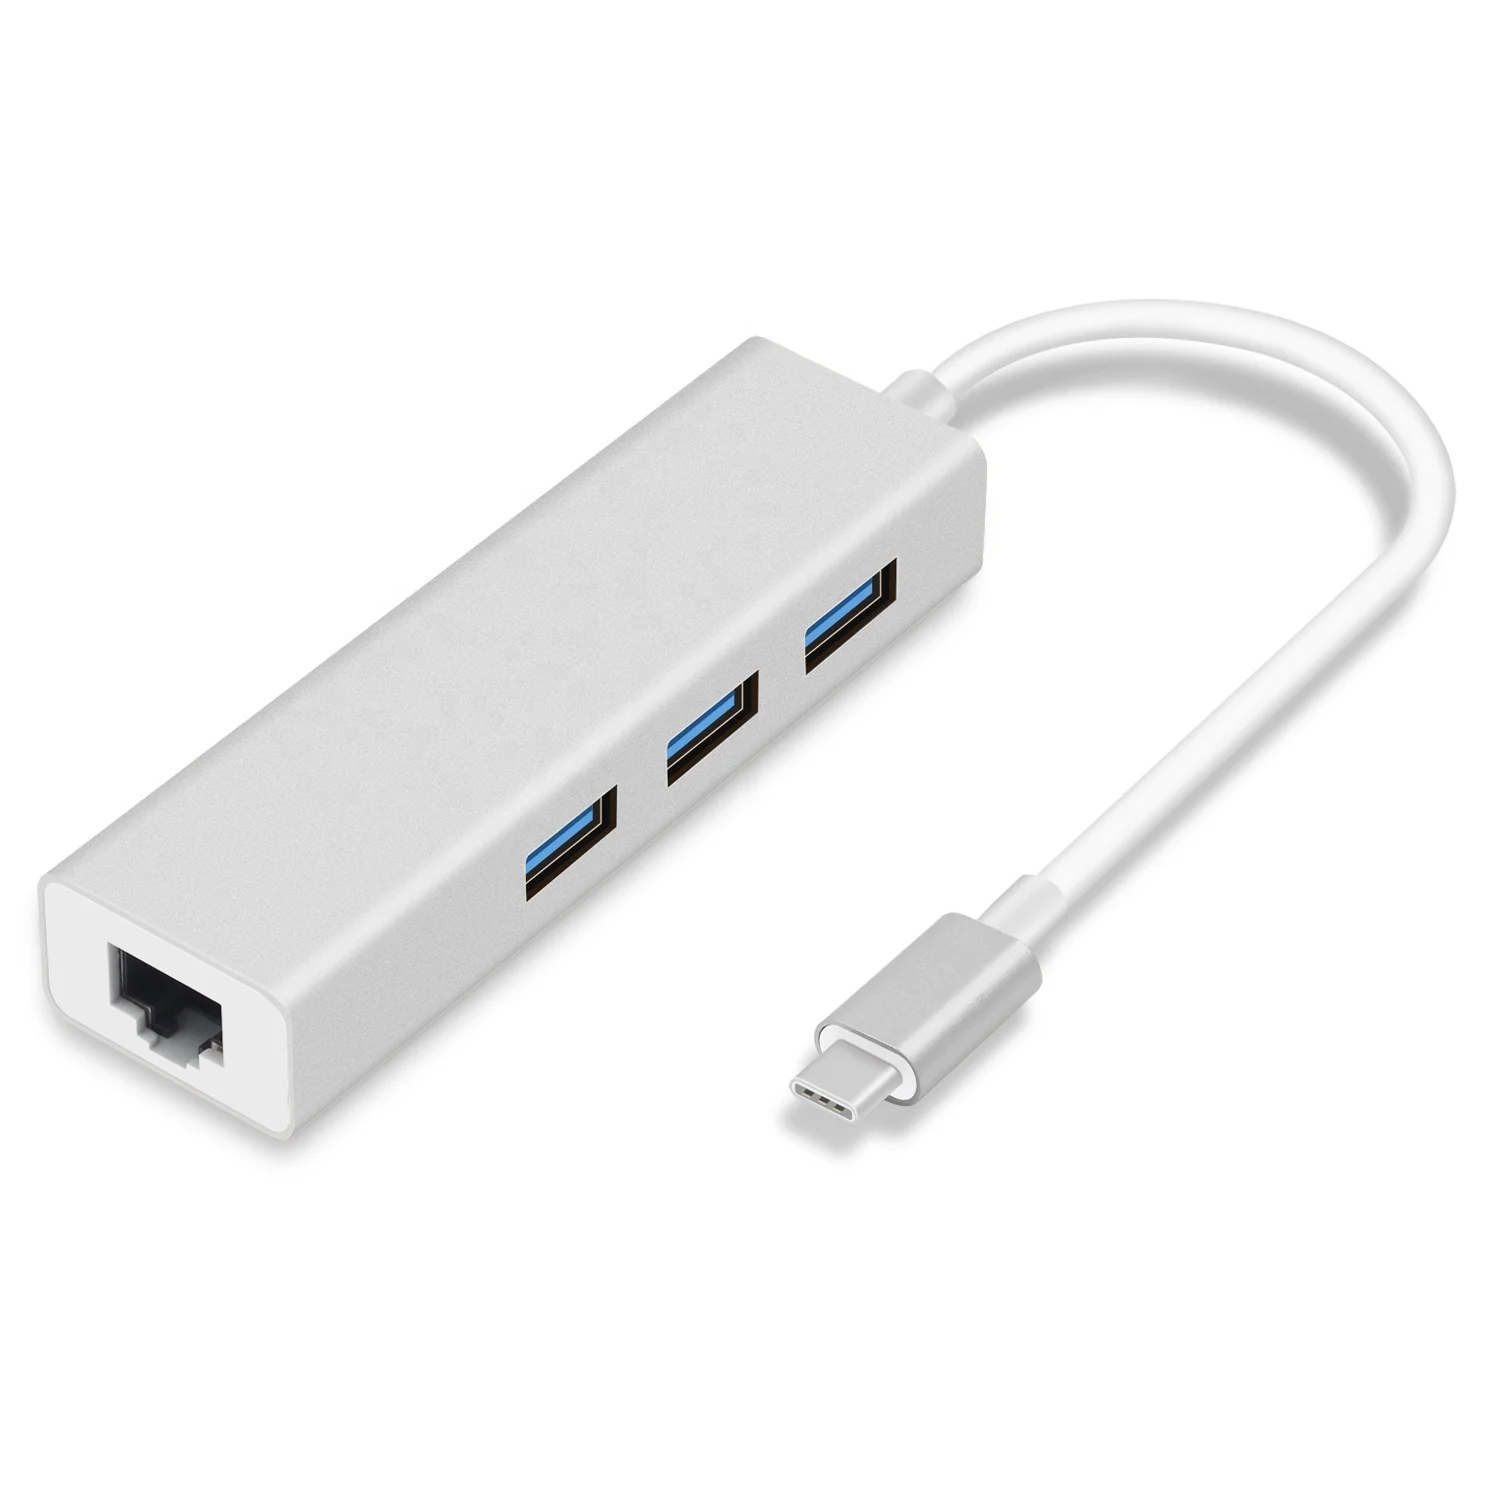 
WISTAR Type C To 1000M RJ45 Ethernet LAN Adapter with 3 Ports USB Charging type c hub 